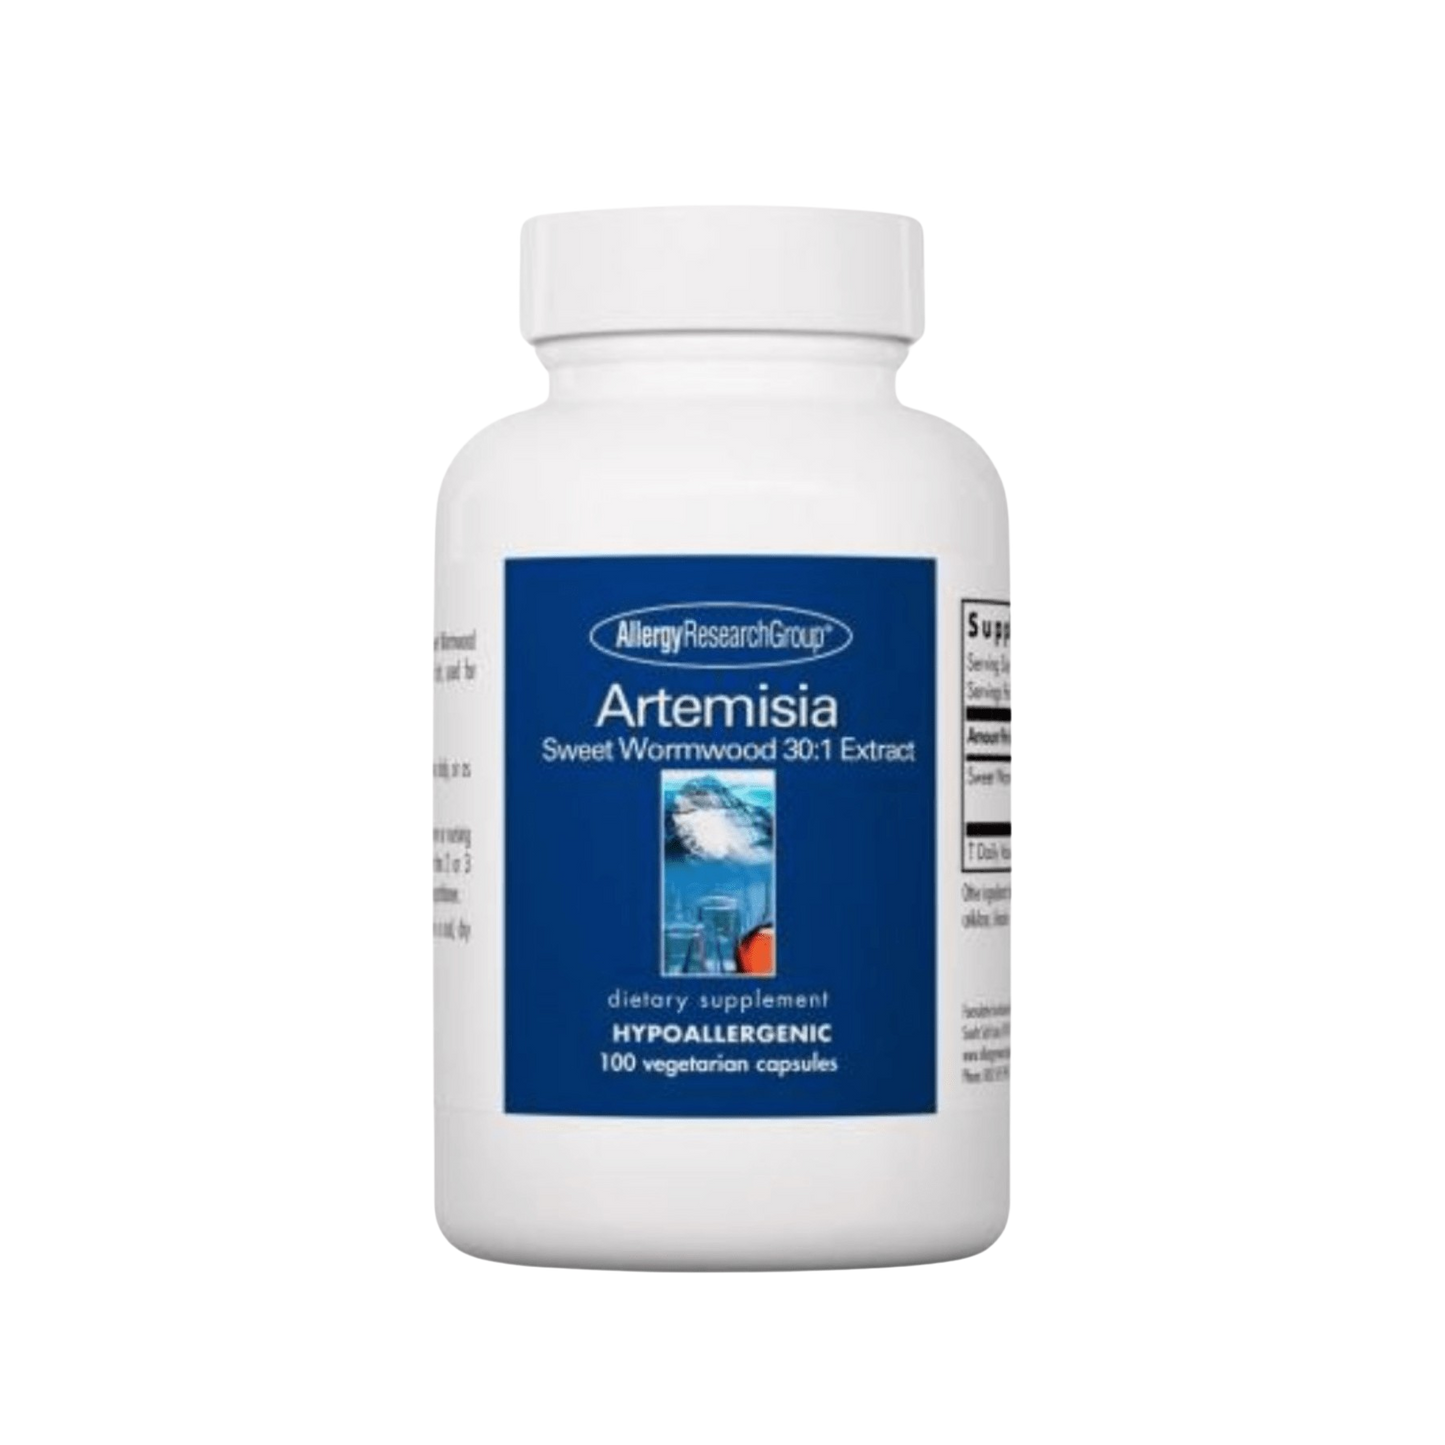 Allergy Research Group Artemisia Capsules - Sweet Wormwood 30:1 Extract